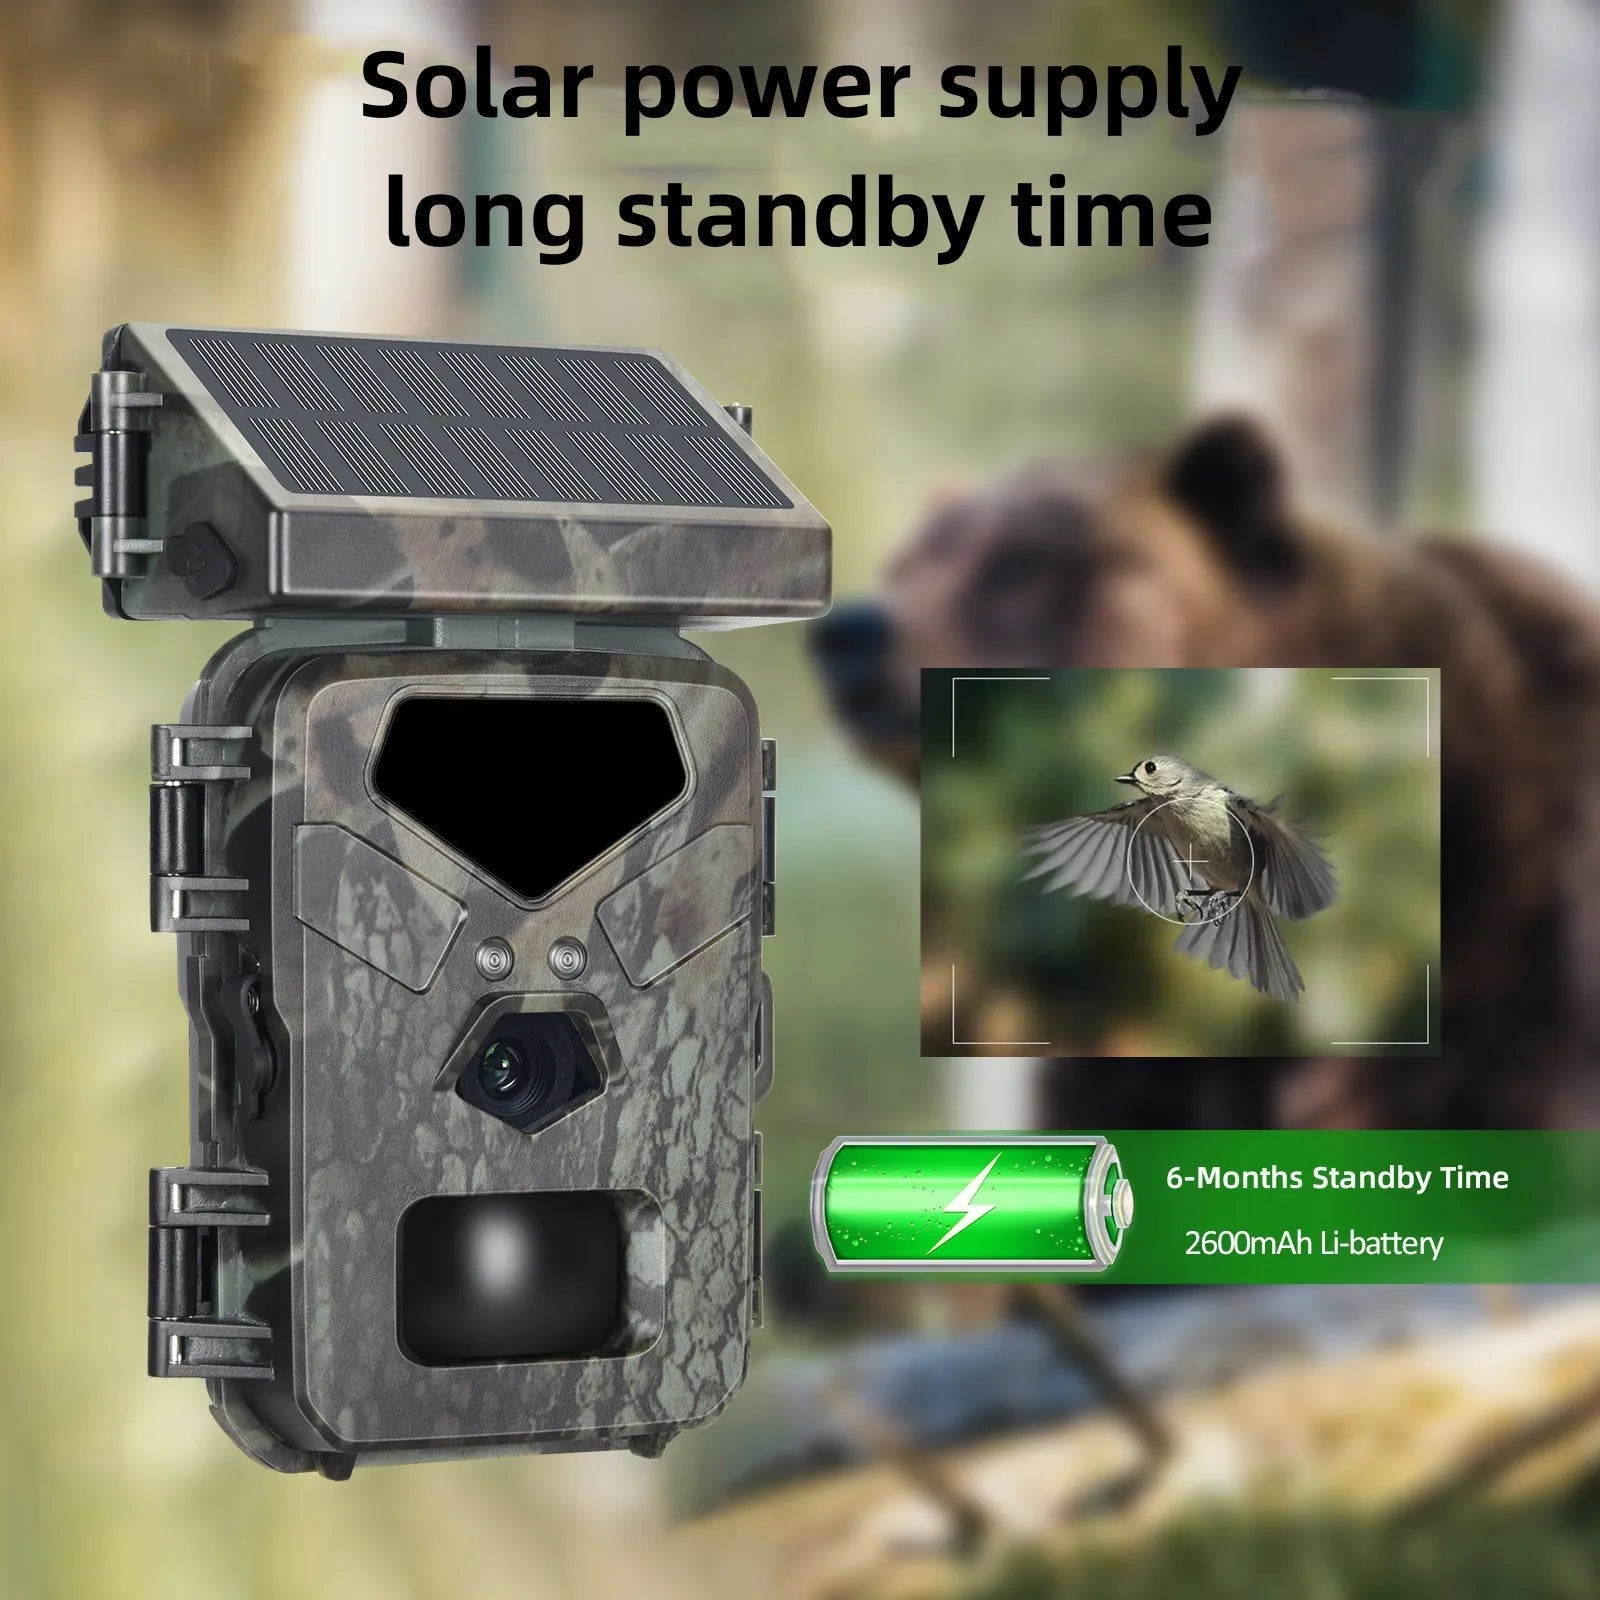 A solar trail camera with a camouflage design, equipped with a large solar panel for extended power supply, designed to capture clear images of wildlife, showcased with a long standby time of 6 months due to its 2600mAh Li-battery.